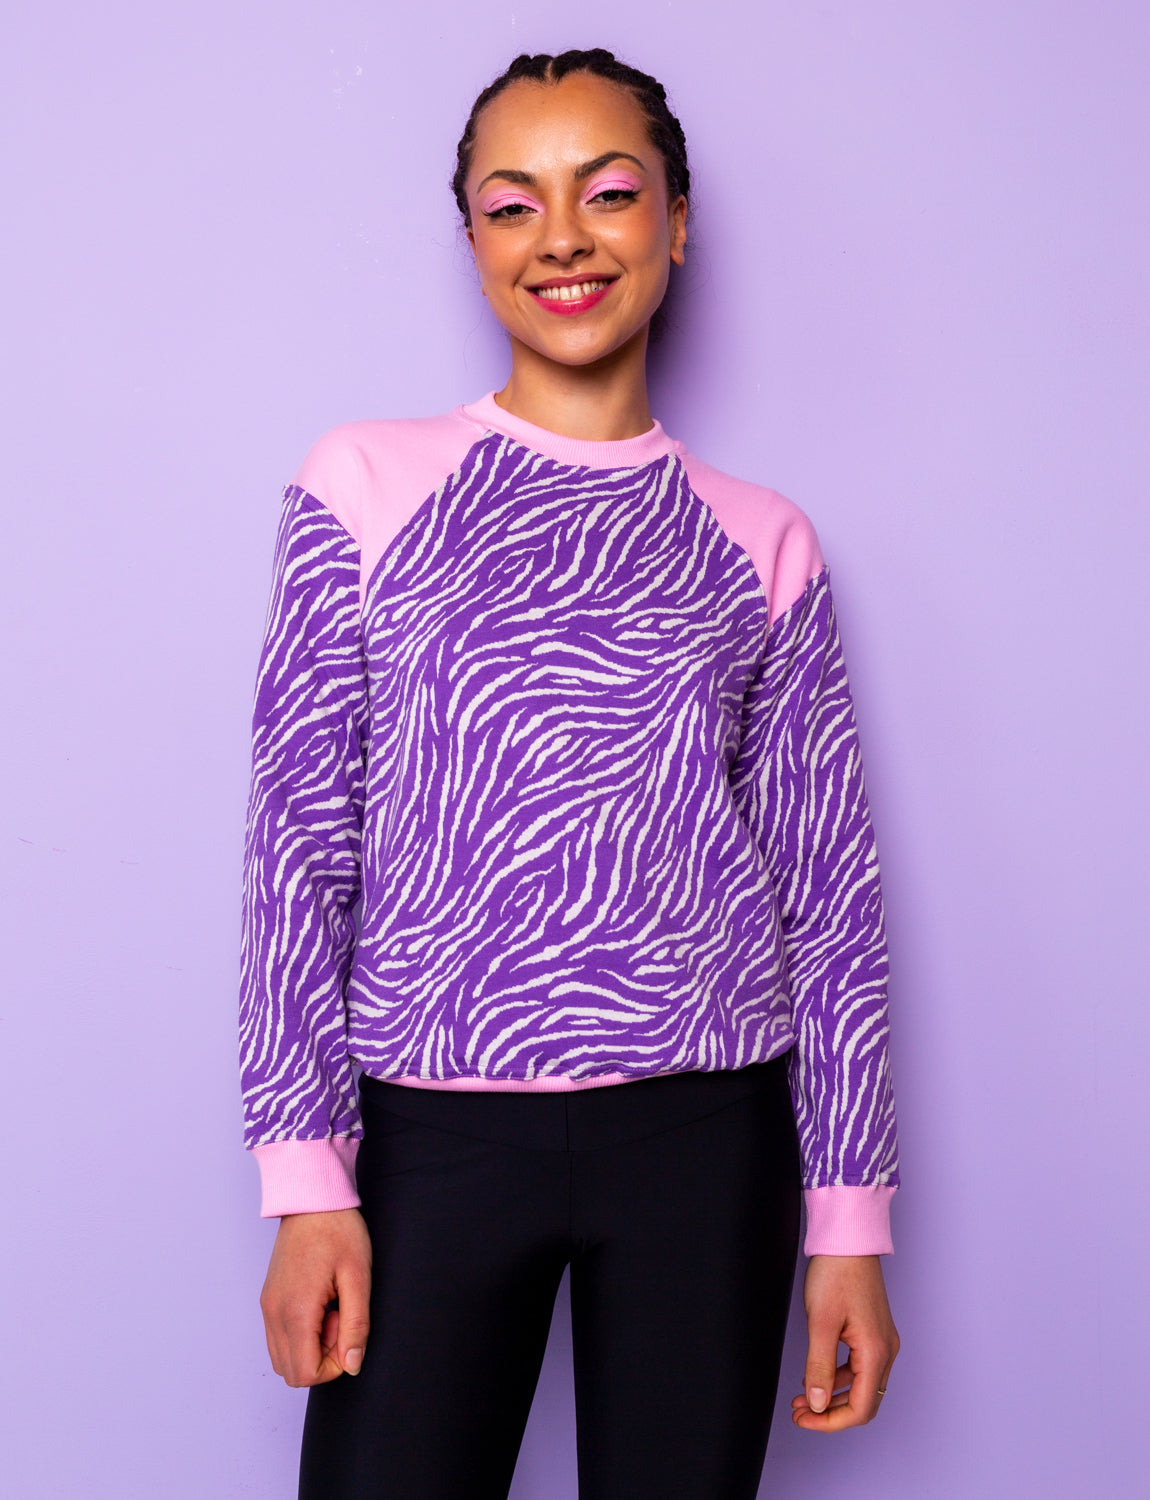 woman wearing a purple zebra print sweatshirt with pink shoulders tucked in at the hips